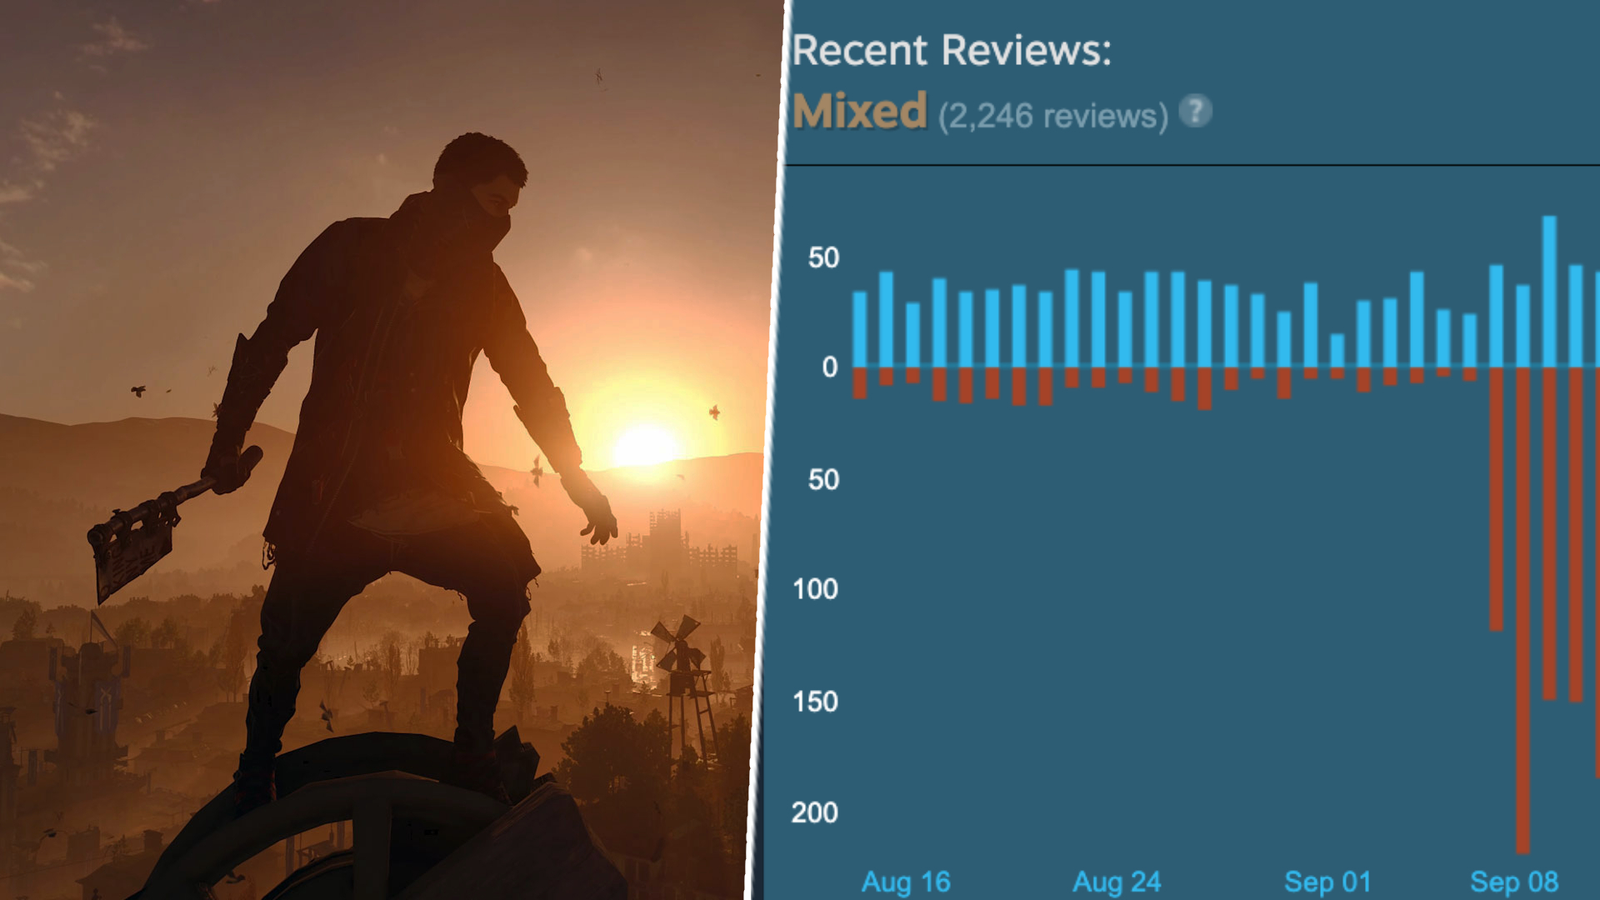 Dying Light 2 Stay Human - 2300 DL Points